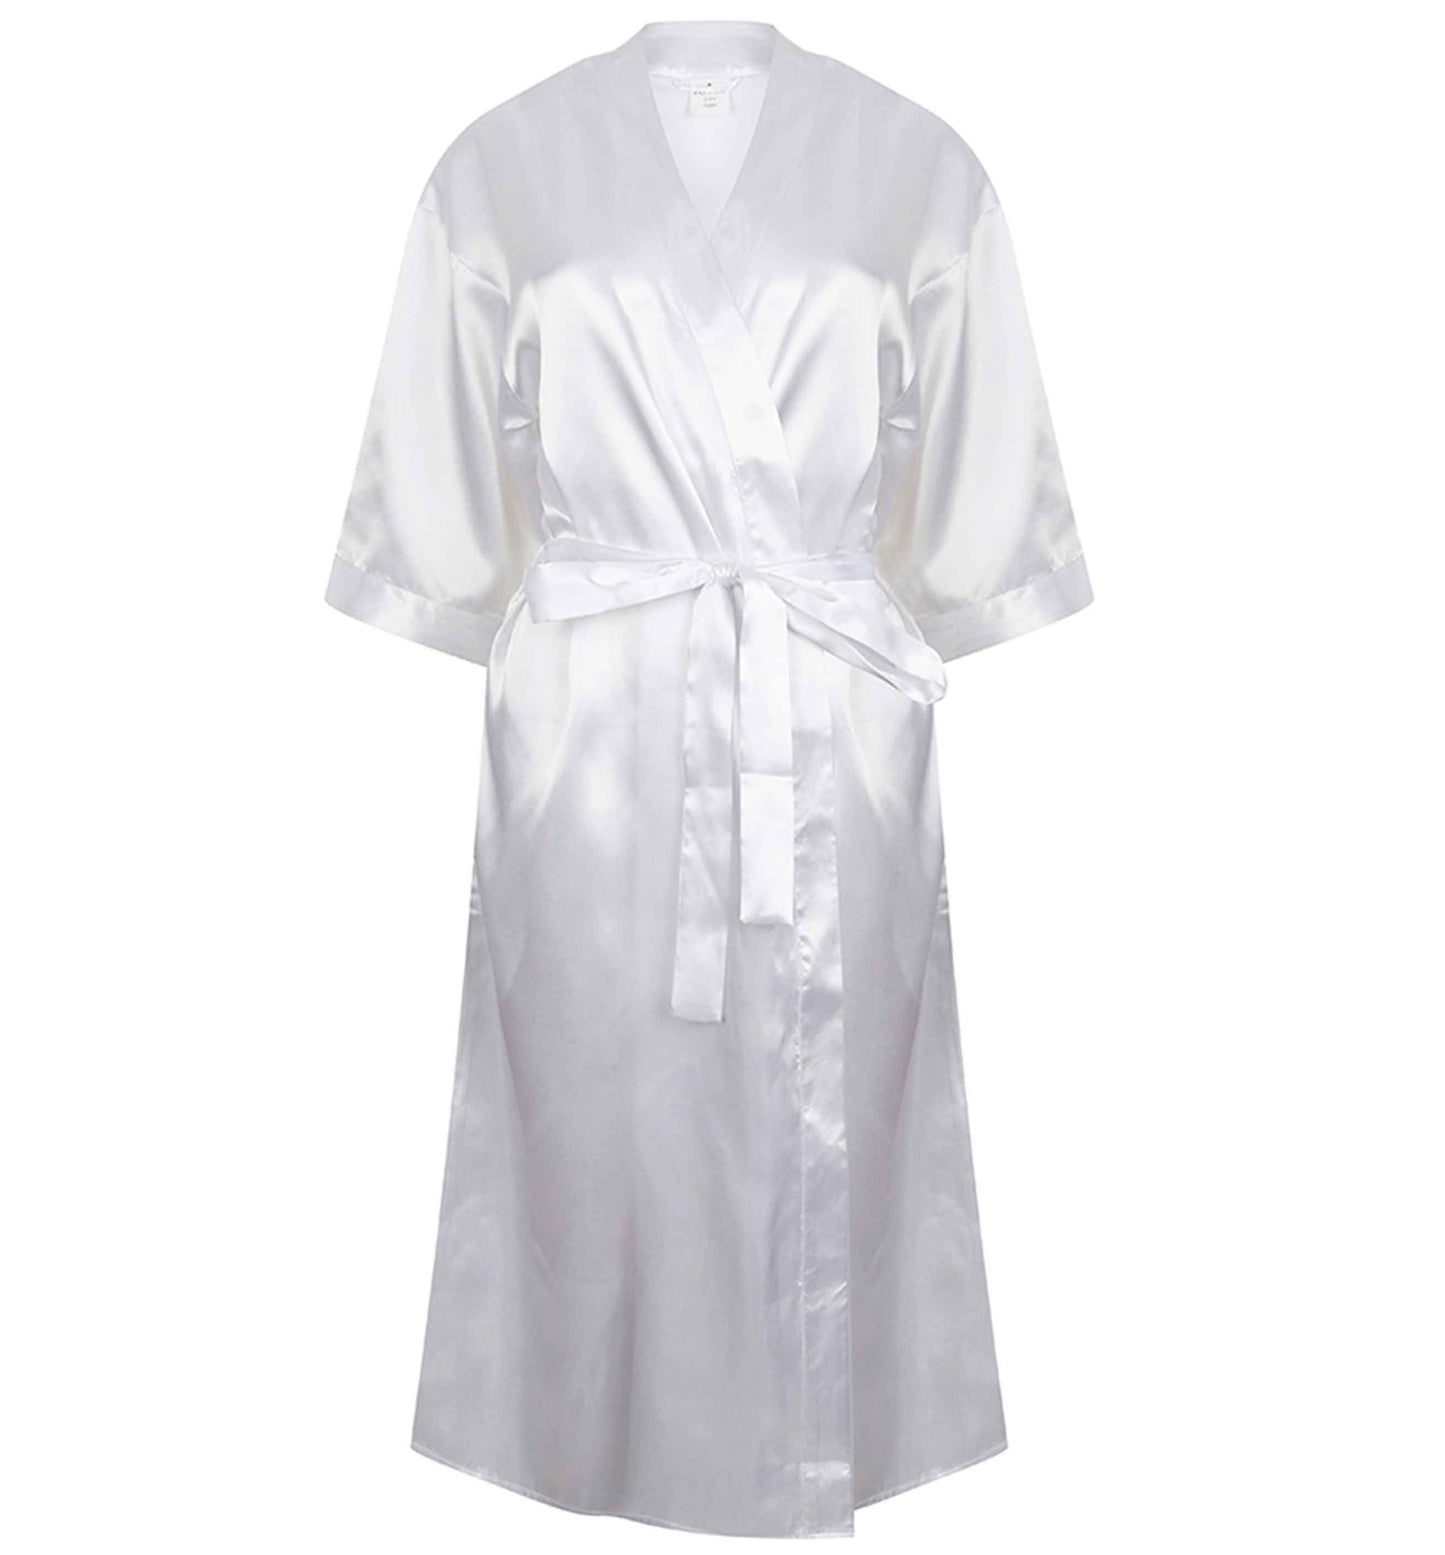 Having a drink or two before I say I do | 8-18 | Kimono style satin robe | Ladies dressing gown